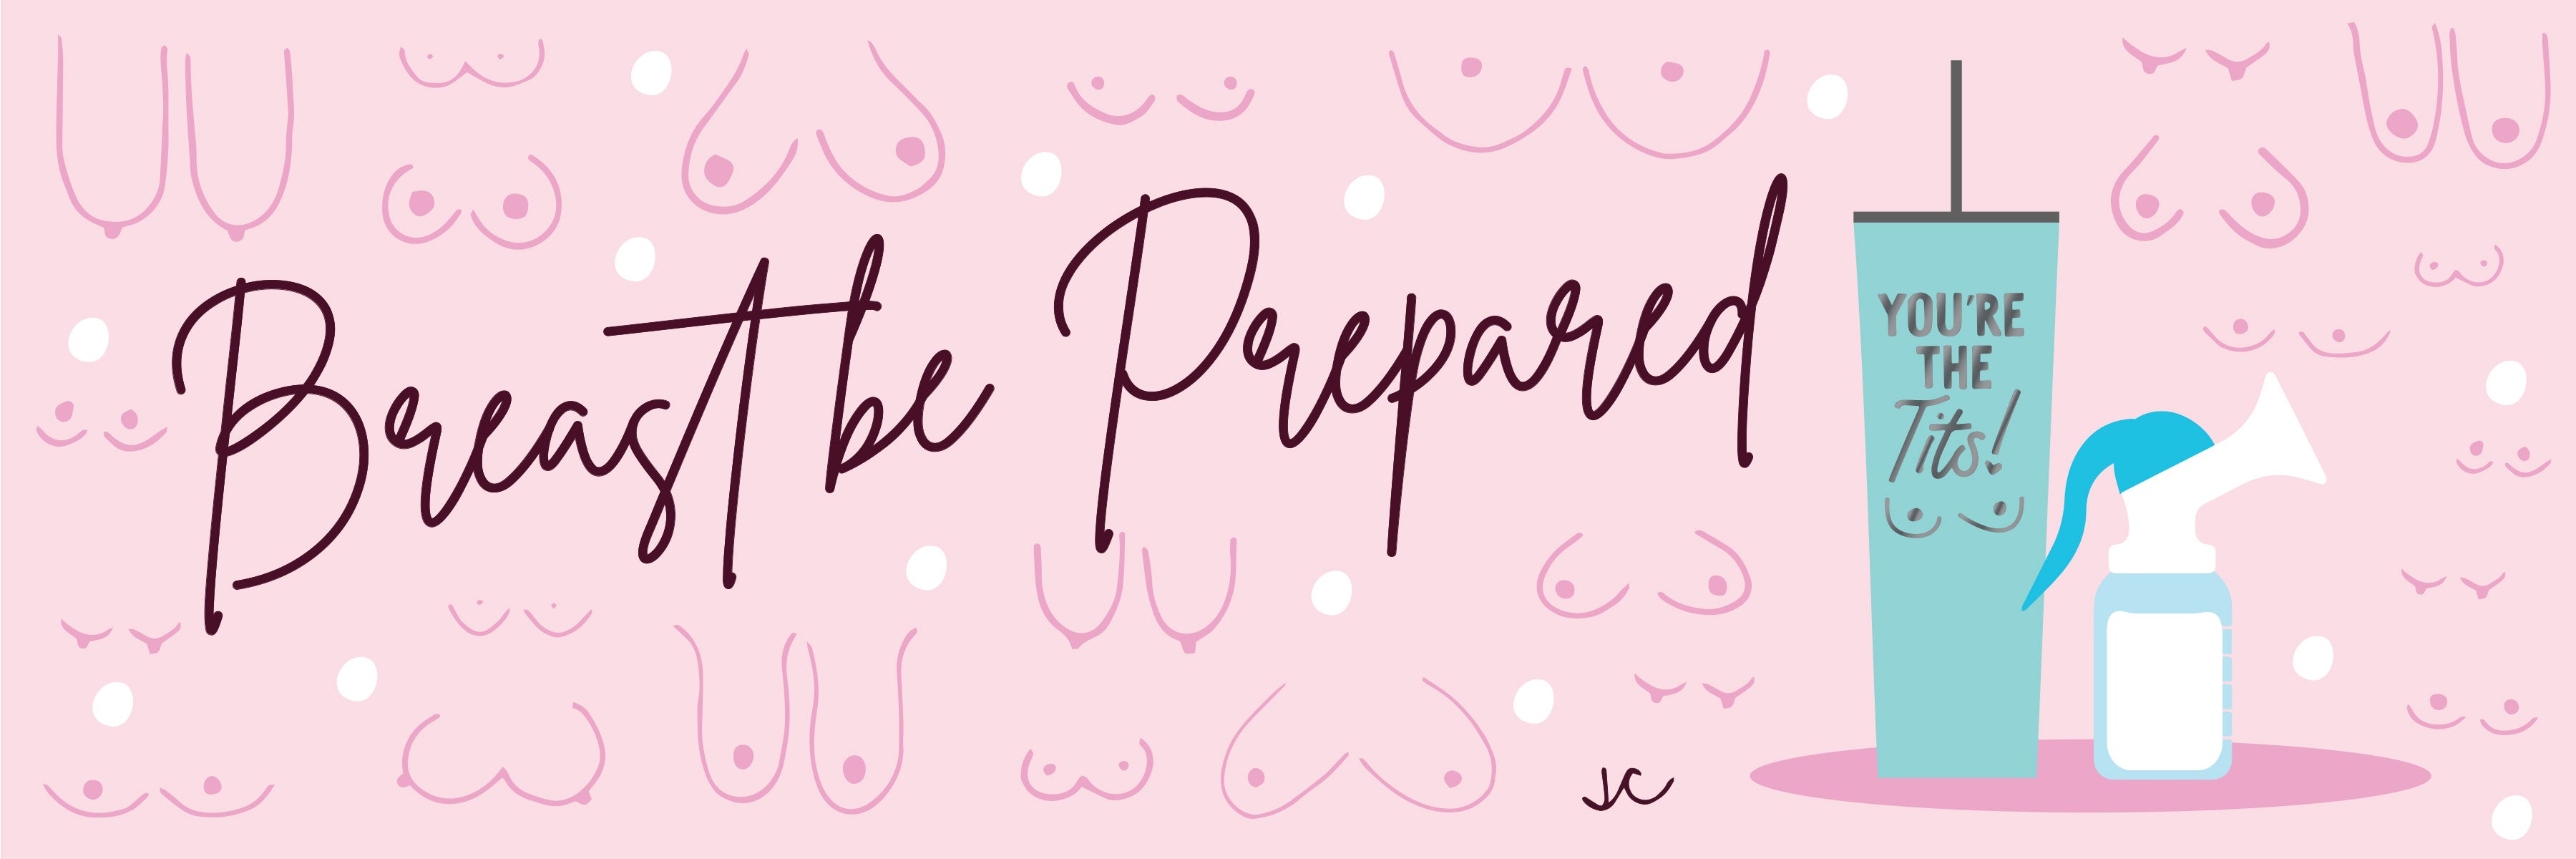 How to Prepare for Postpartum and Why it’s important - Titty City Design - Breast be Prepared - You're the Tits-full